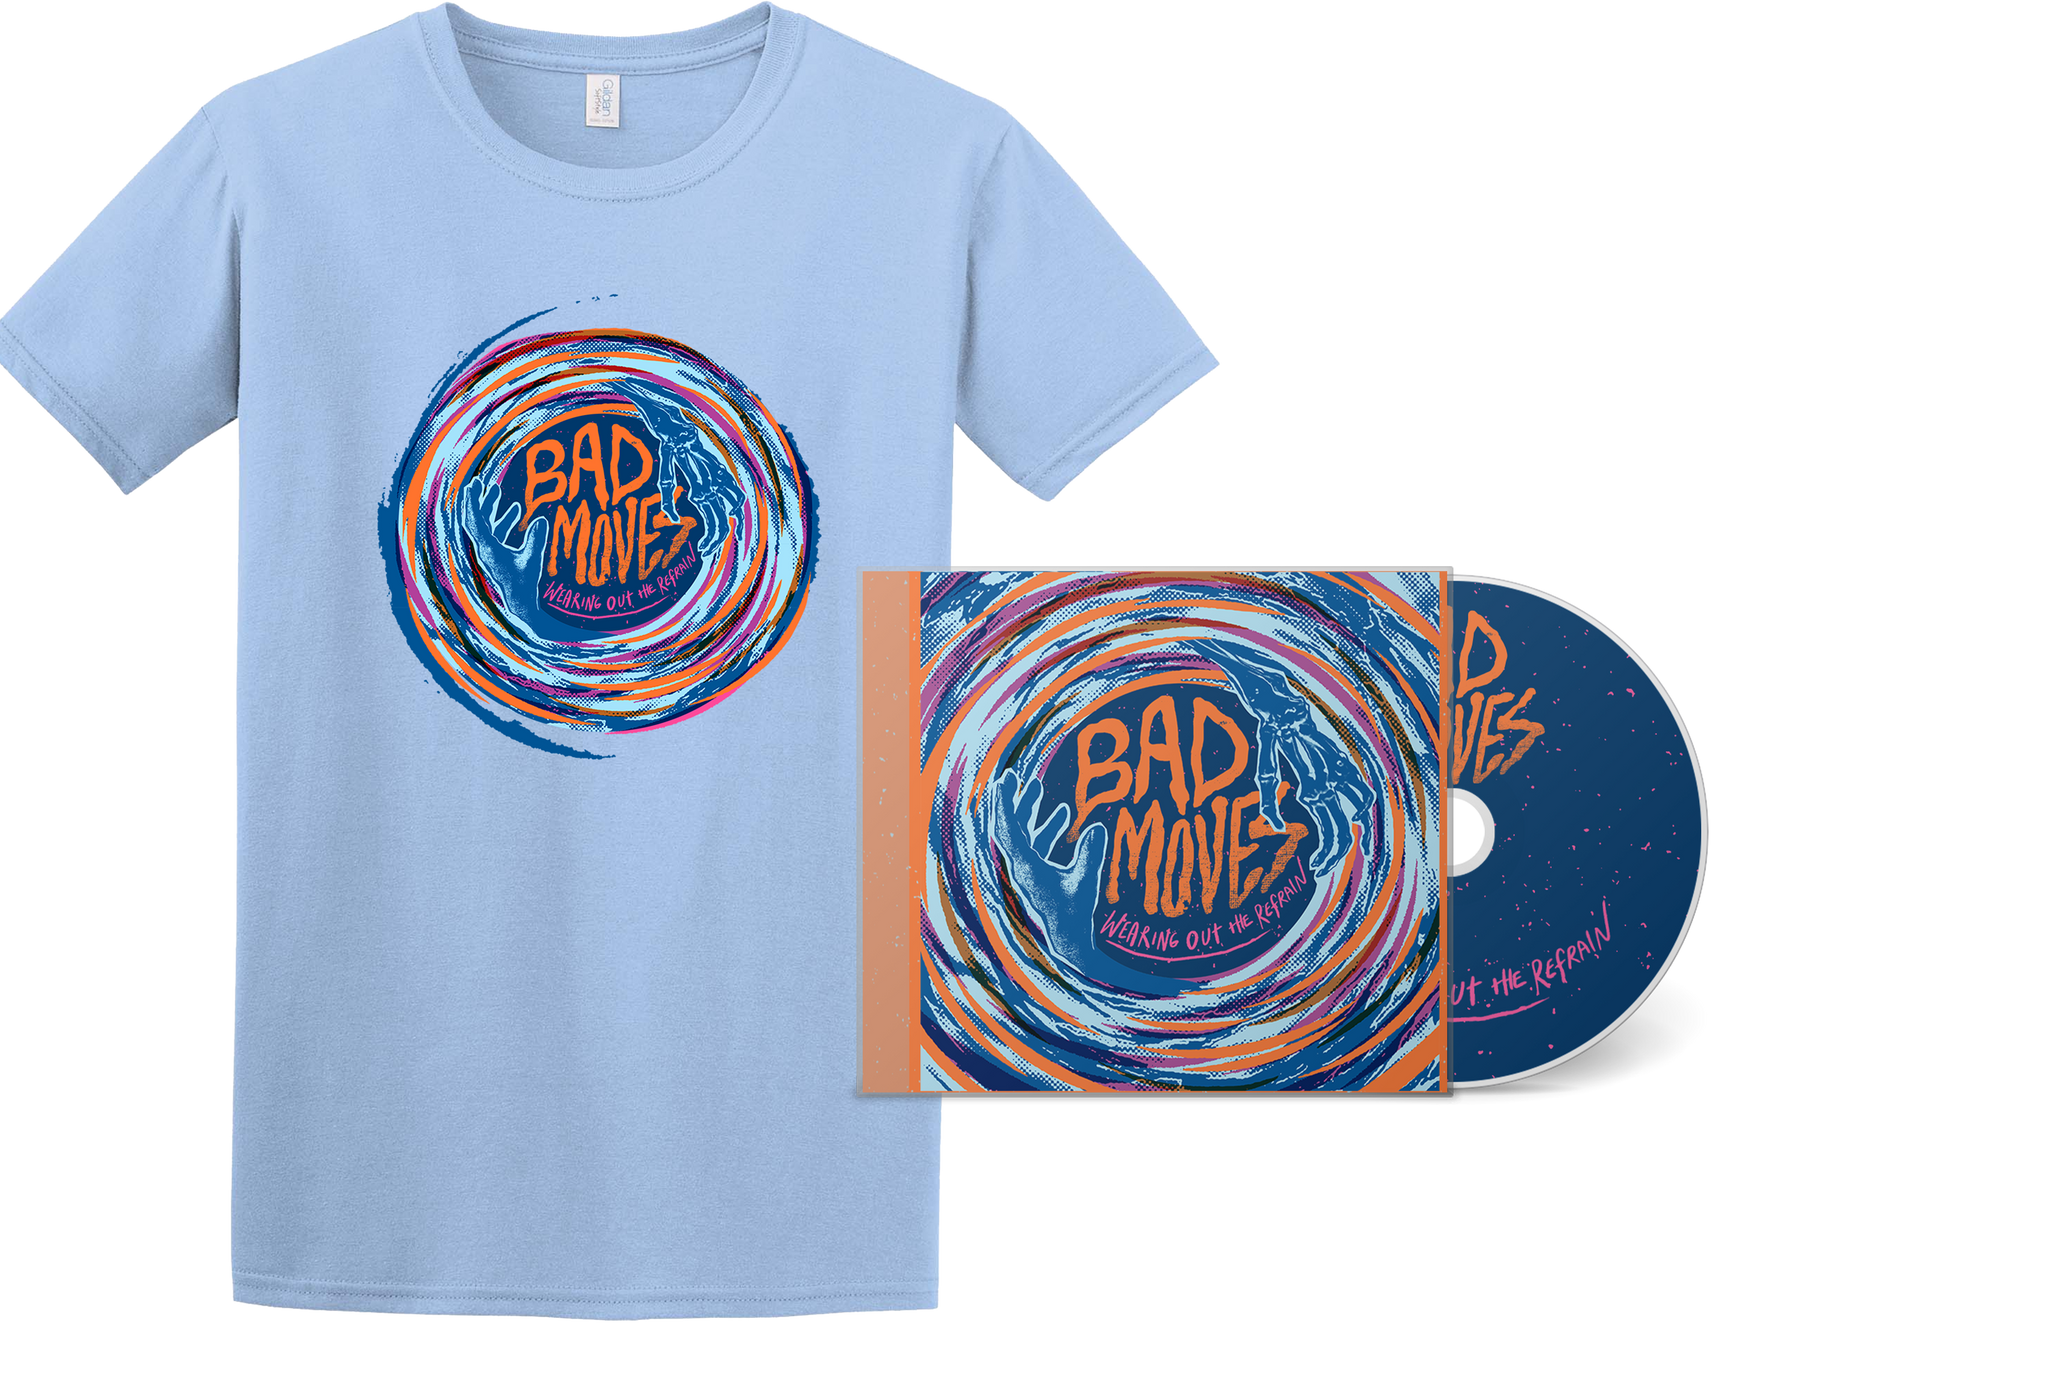 Bad Moves Wearing Out The Refrain Shirt + CD